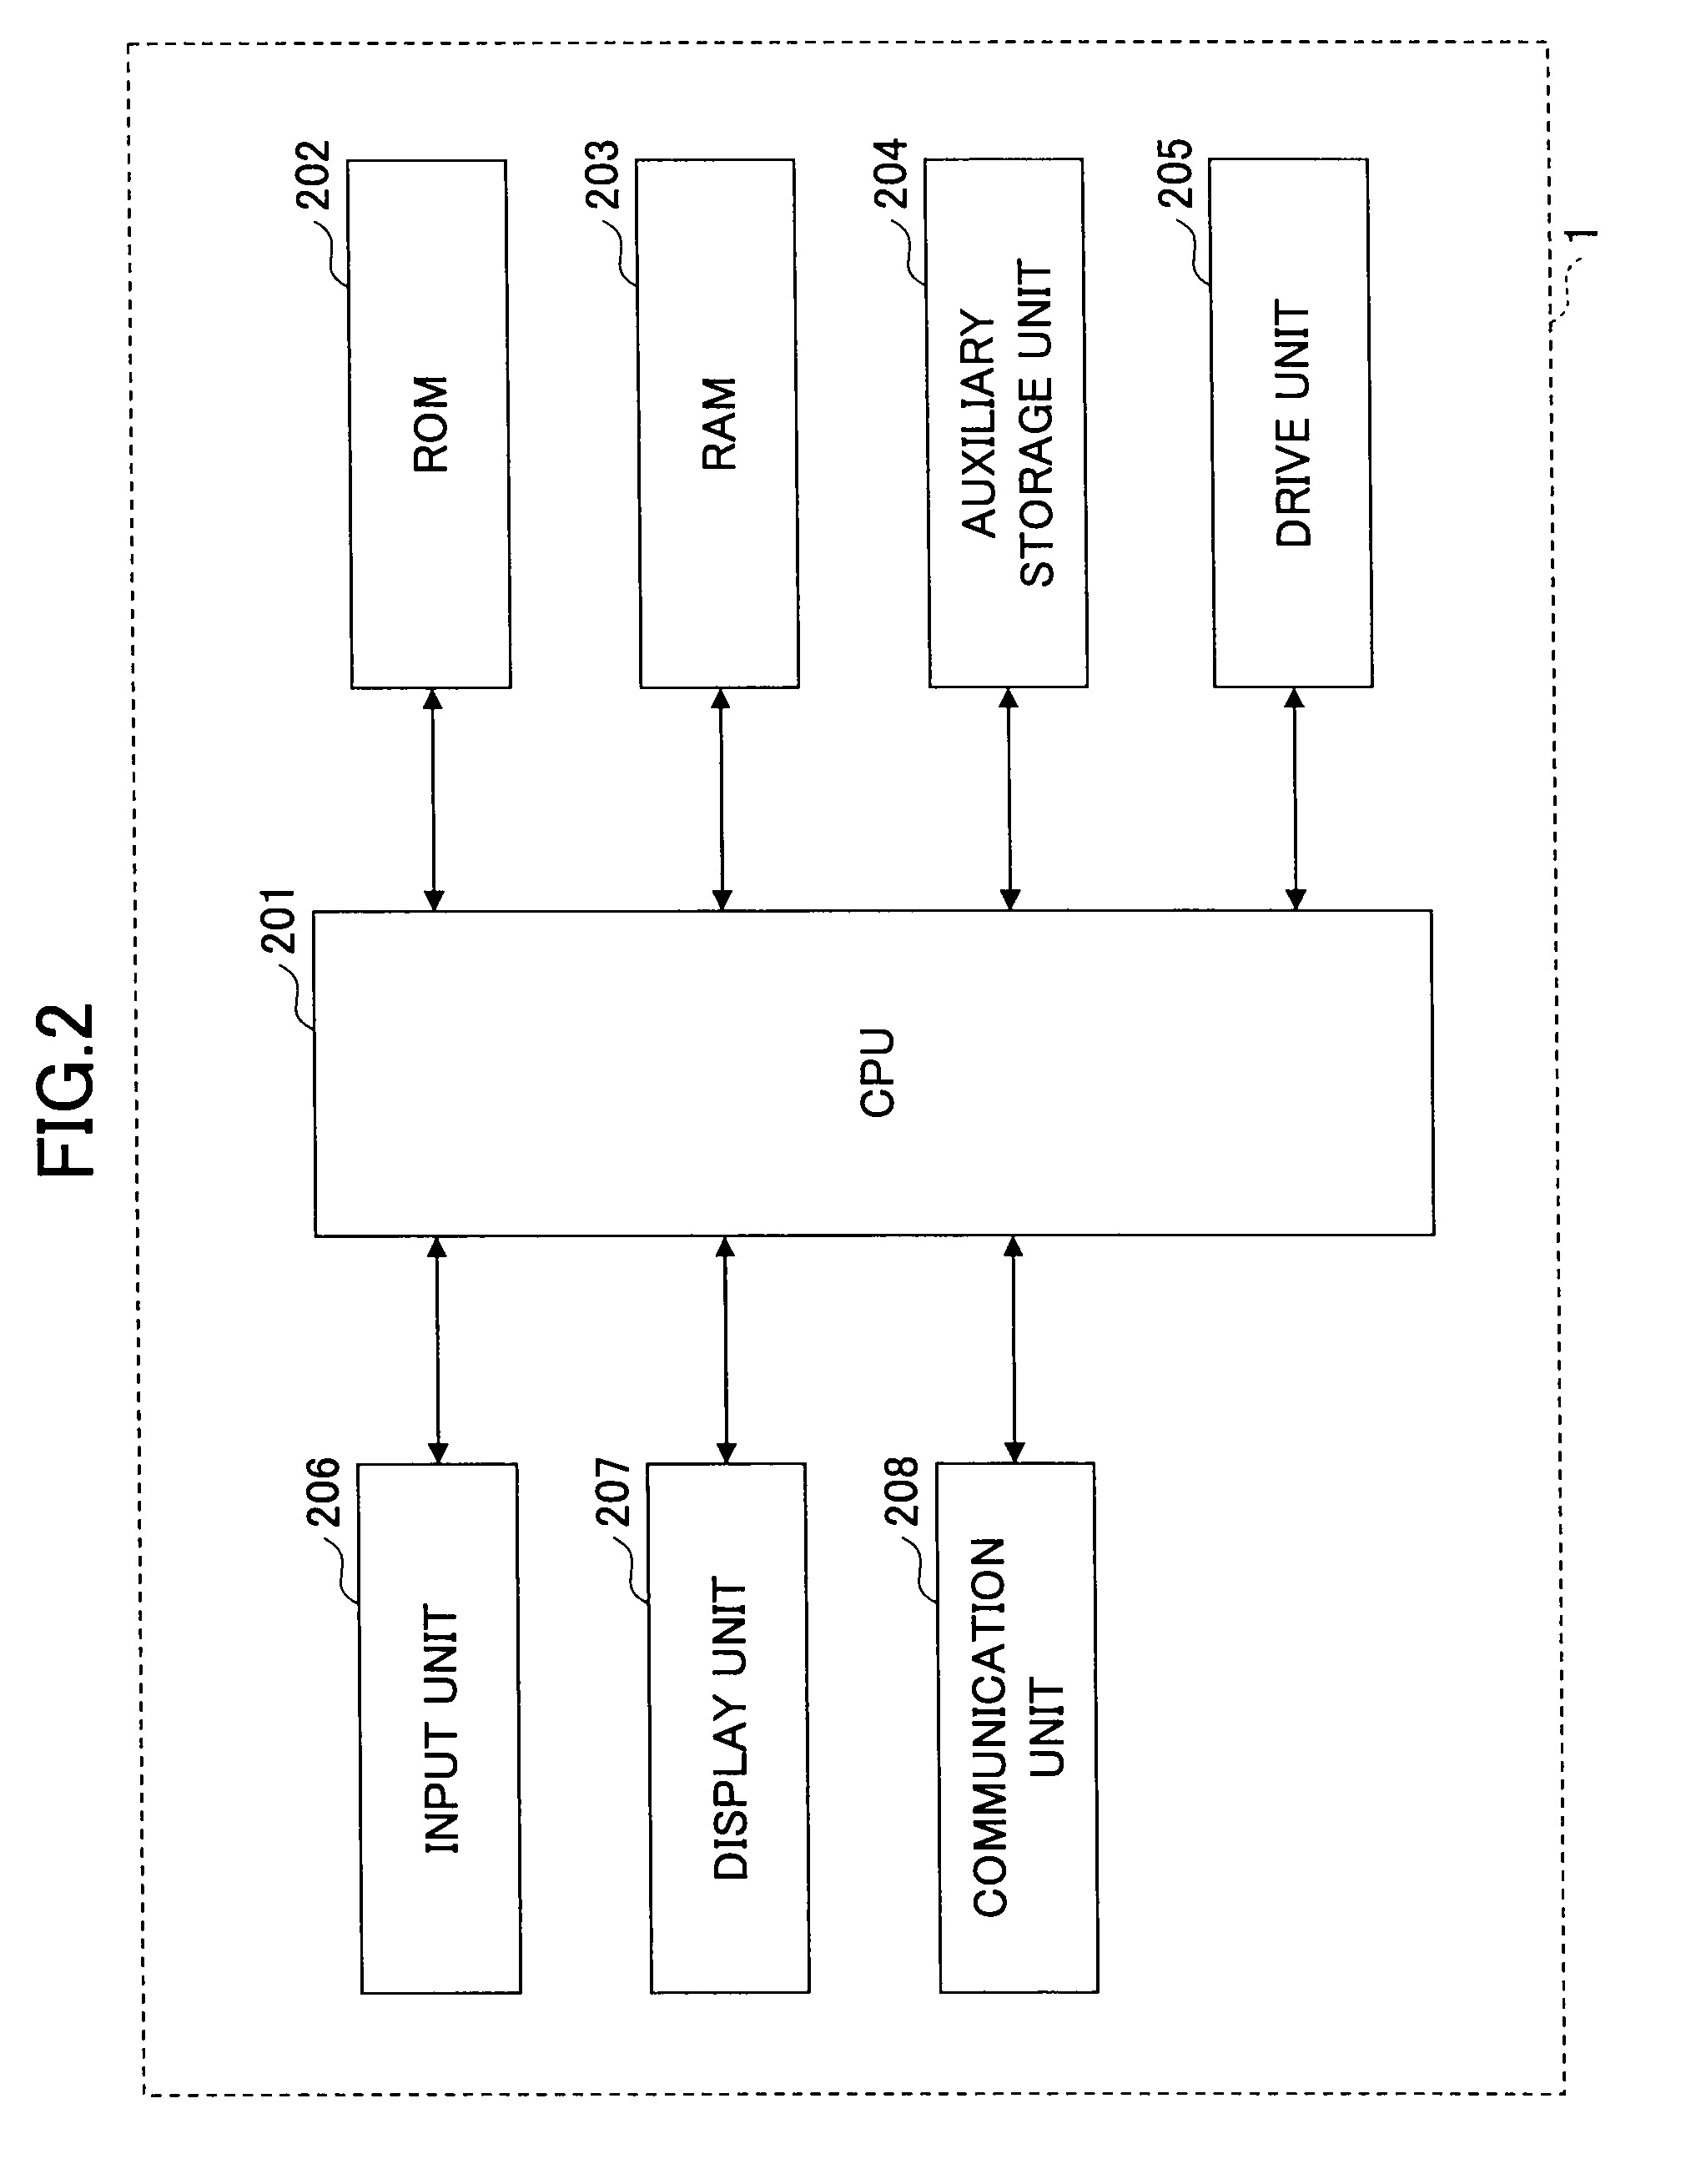 Information processing apparatus, full text retrieval method, and computer-readable encoding medium recorded with a computer program thereof